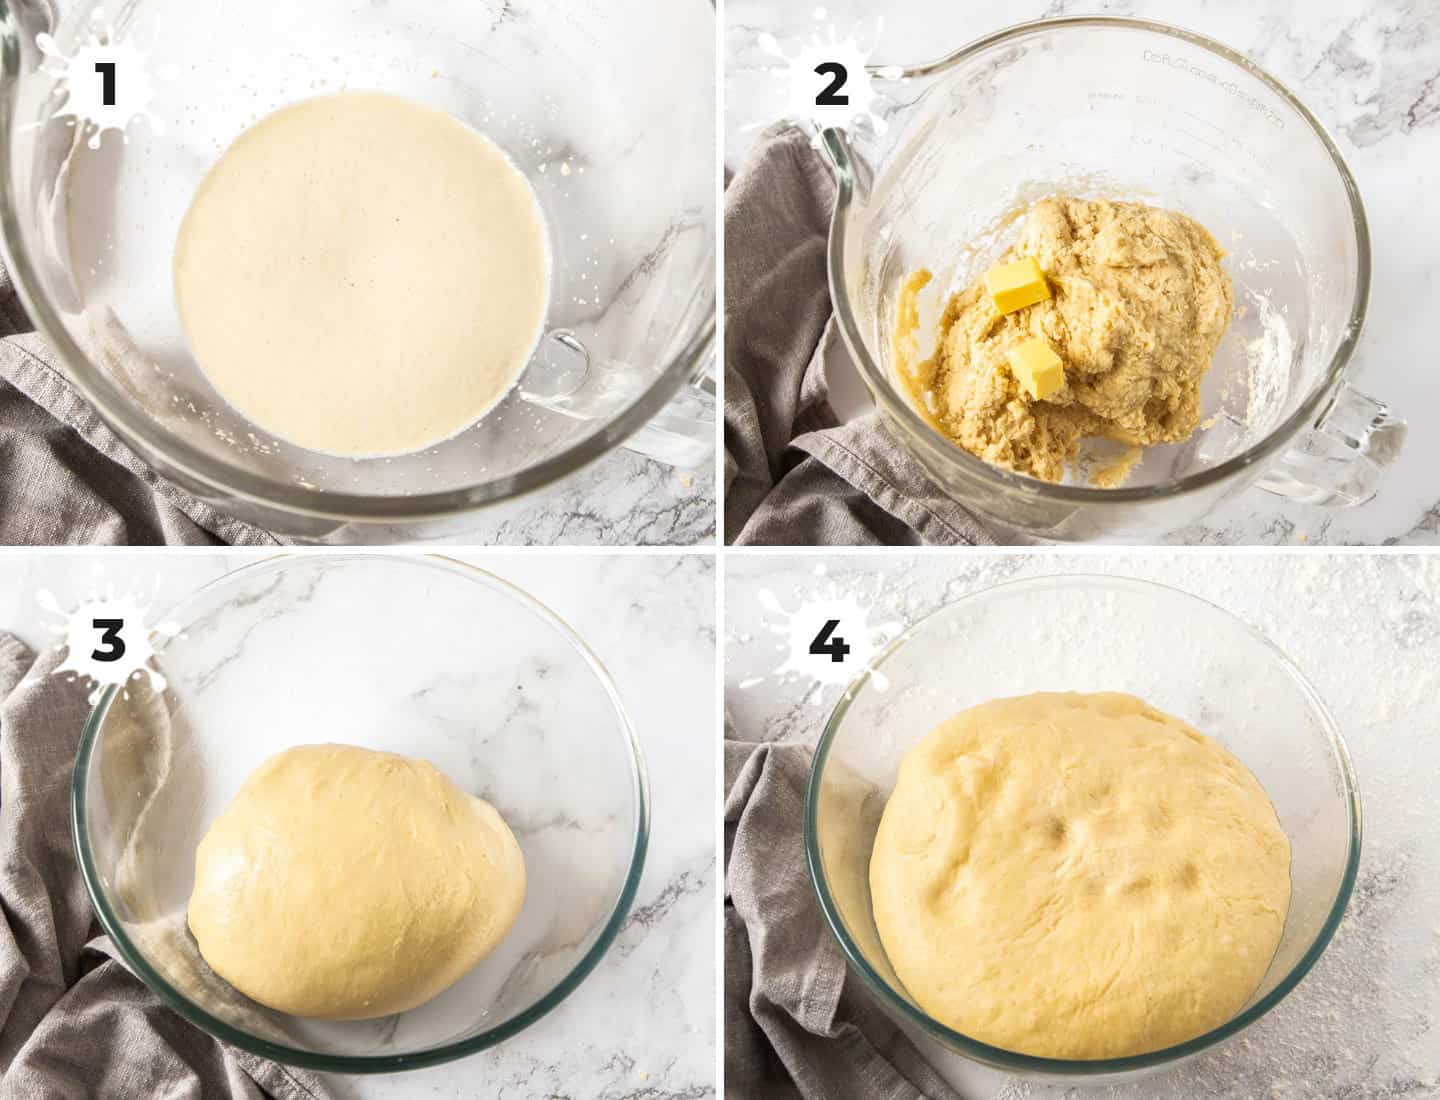 A collage of 4 images showing how to make doughnut dough.